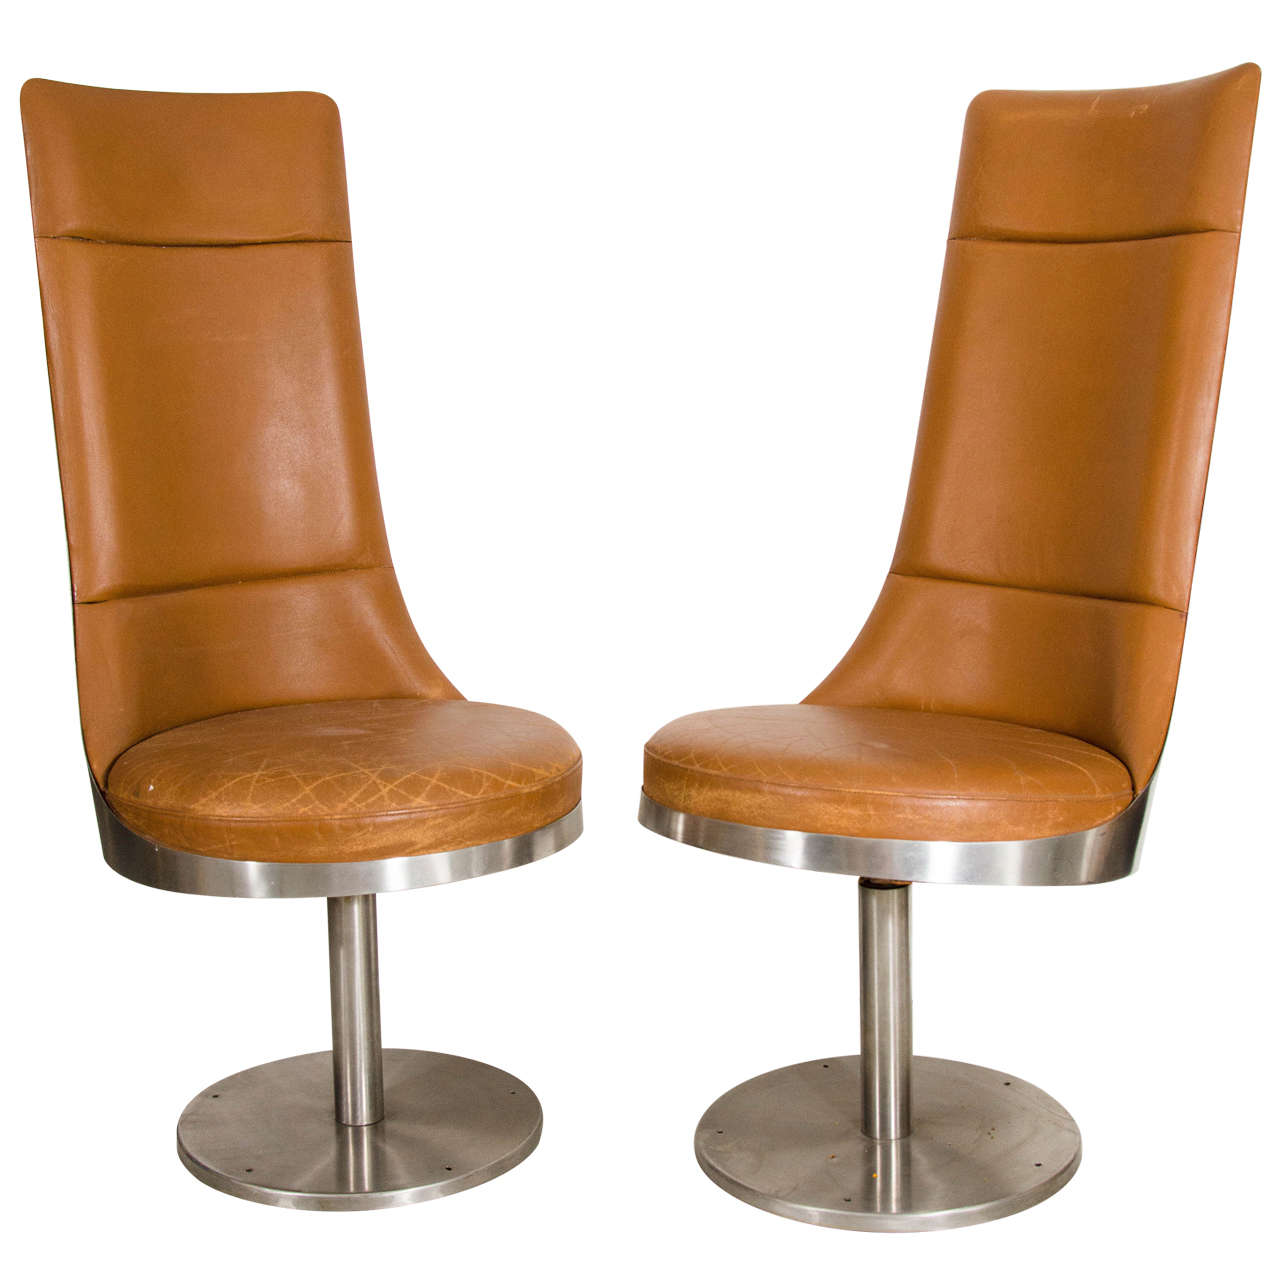 Maria Pergay "Swiveling Chair" for Architonic For Sale